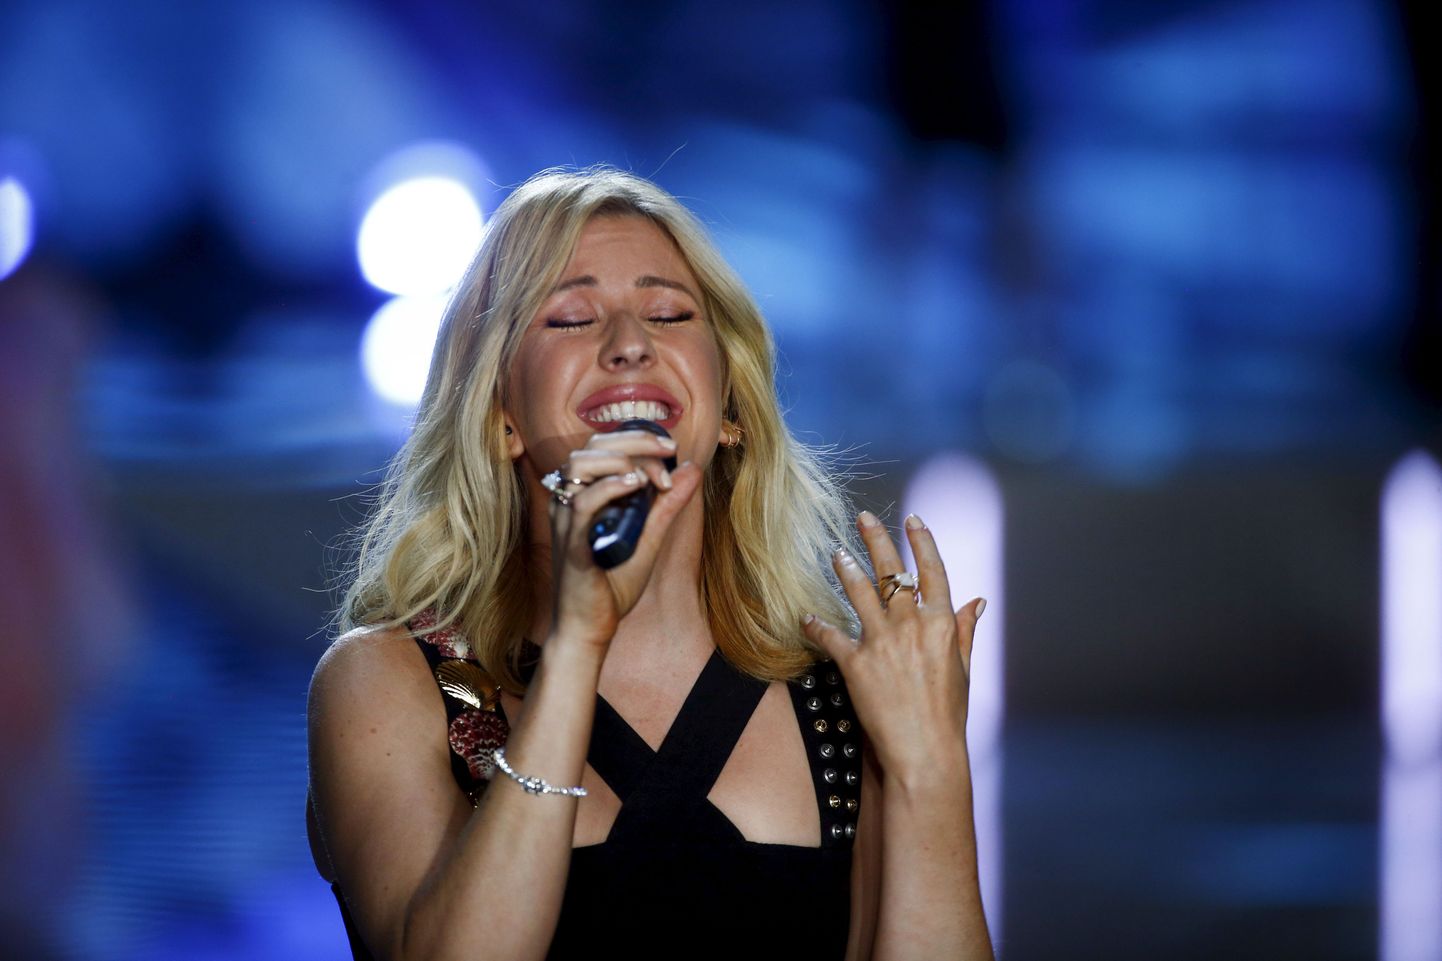 Singer Ellie Goulding performs during the 2015 Victoria's Secret Fashion Show in New York, November 10, 2015. REUTERS/Lucas Jackson ATTENTION EDITORS - FOR EDITORIAL USE ONLY. NOT FOR SALE FOR MARKETING OR ADVERTISING CAMPAIGNS